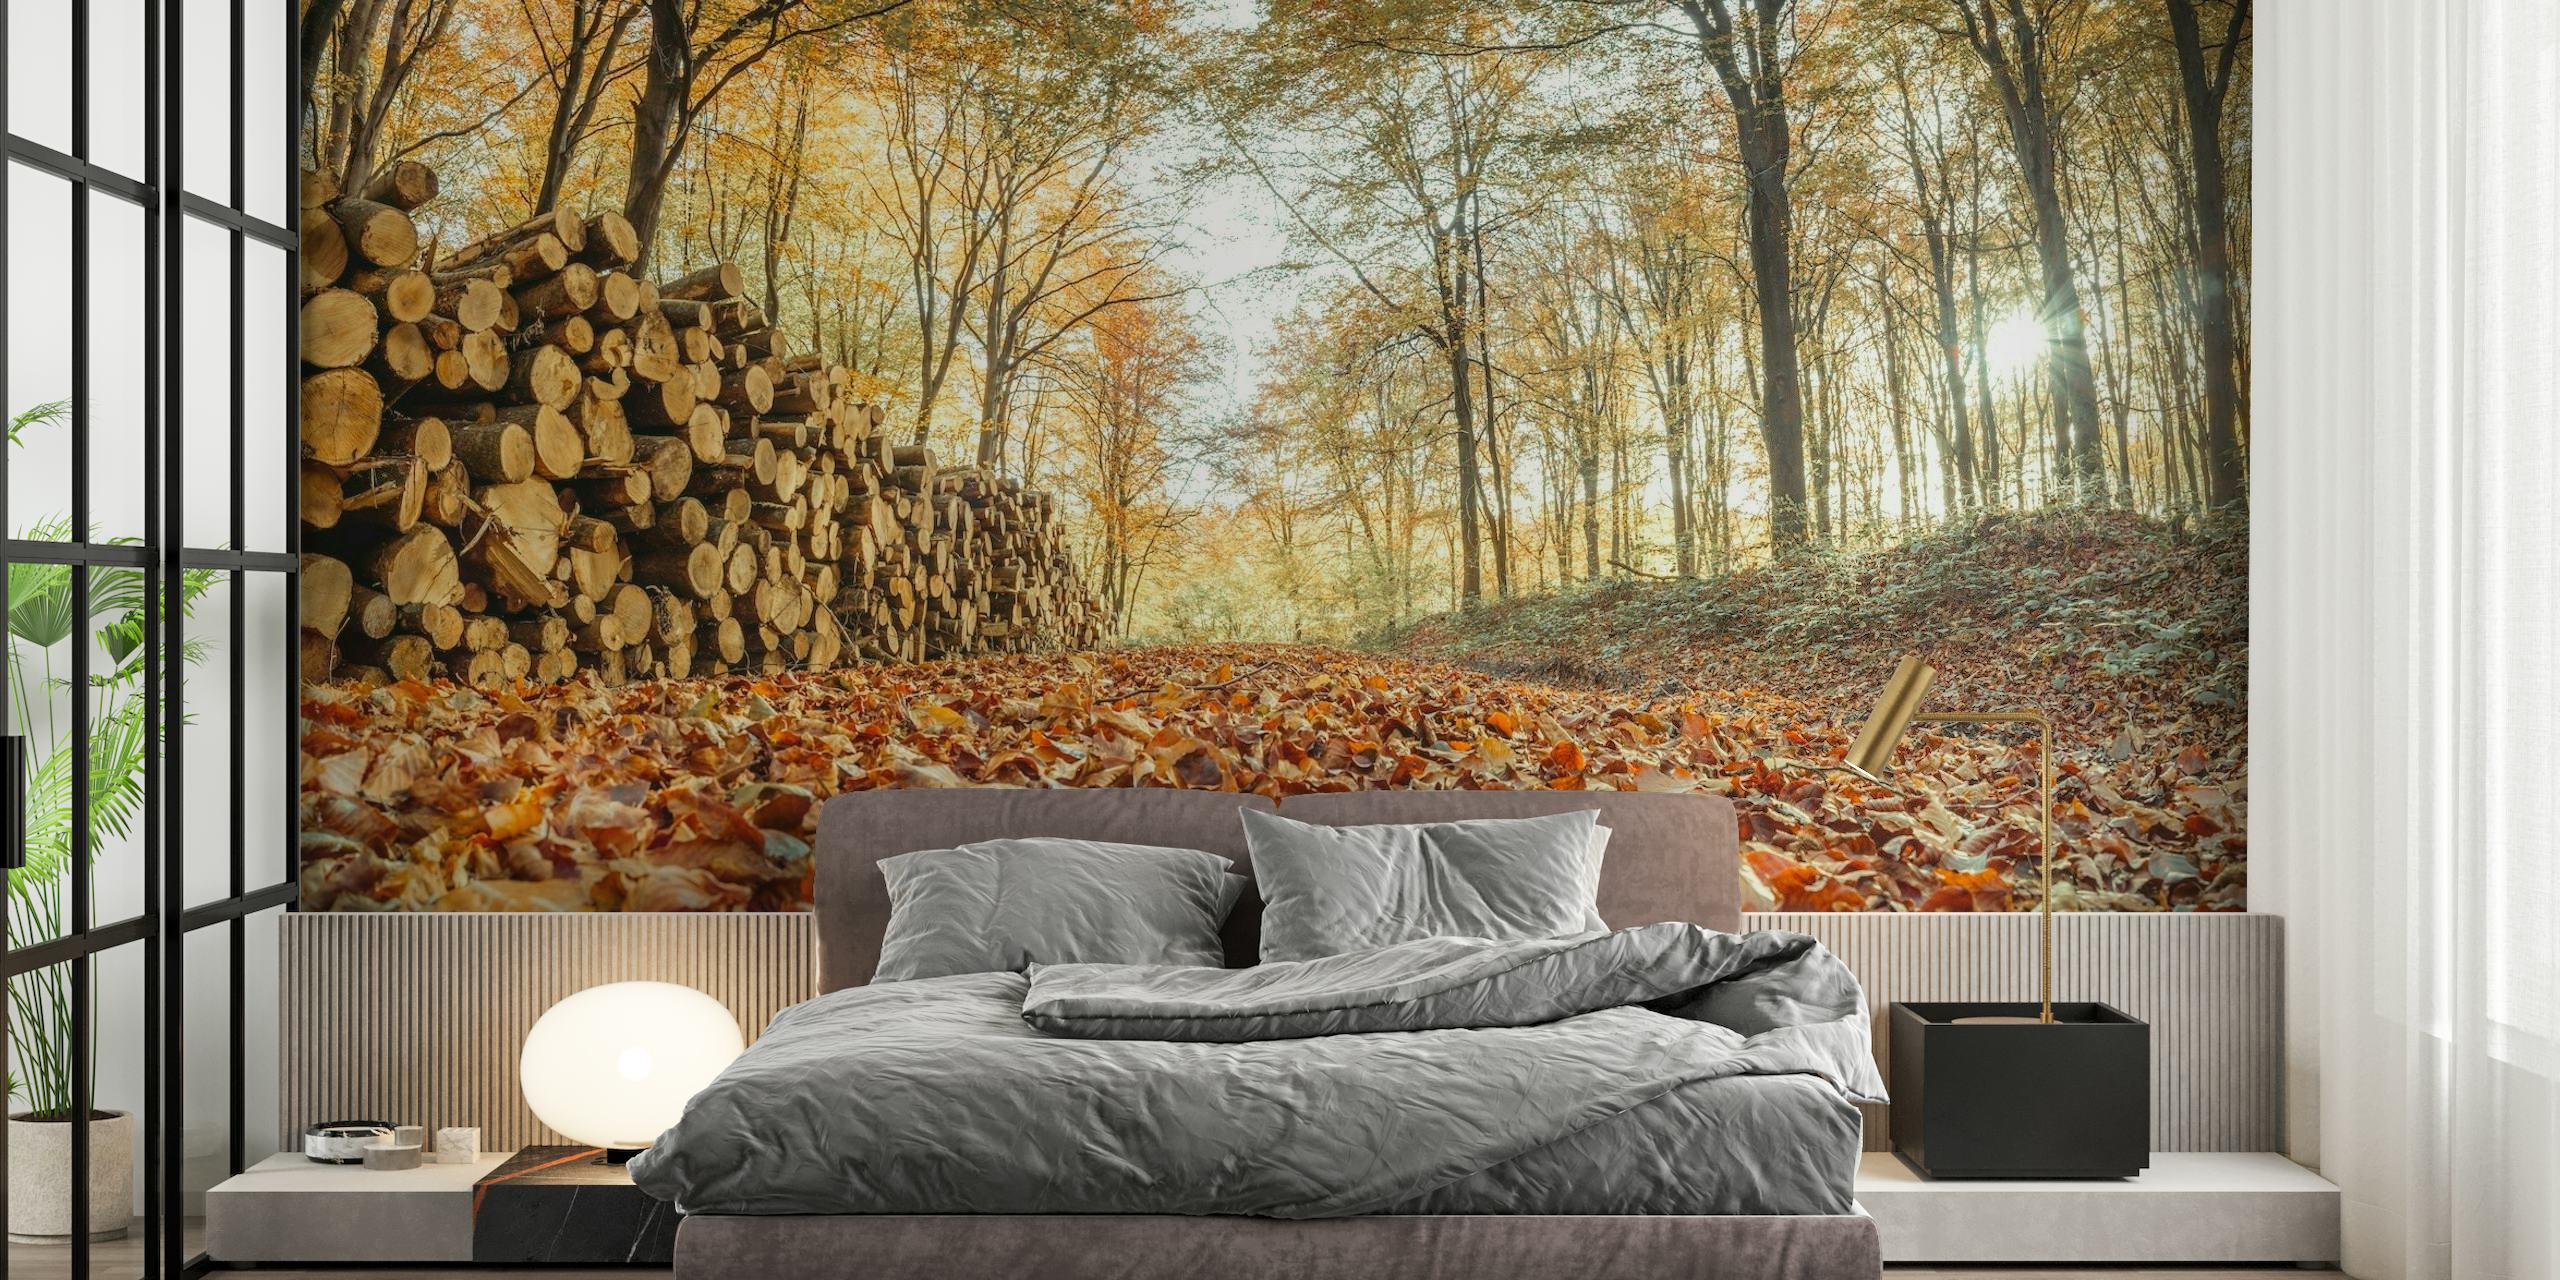 A cozy autumn forest scene with a pile of logs and a blanket of fallen leaves